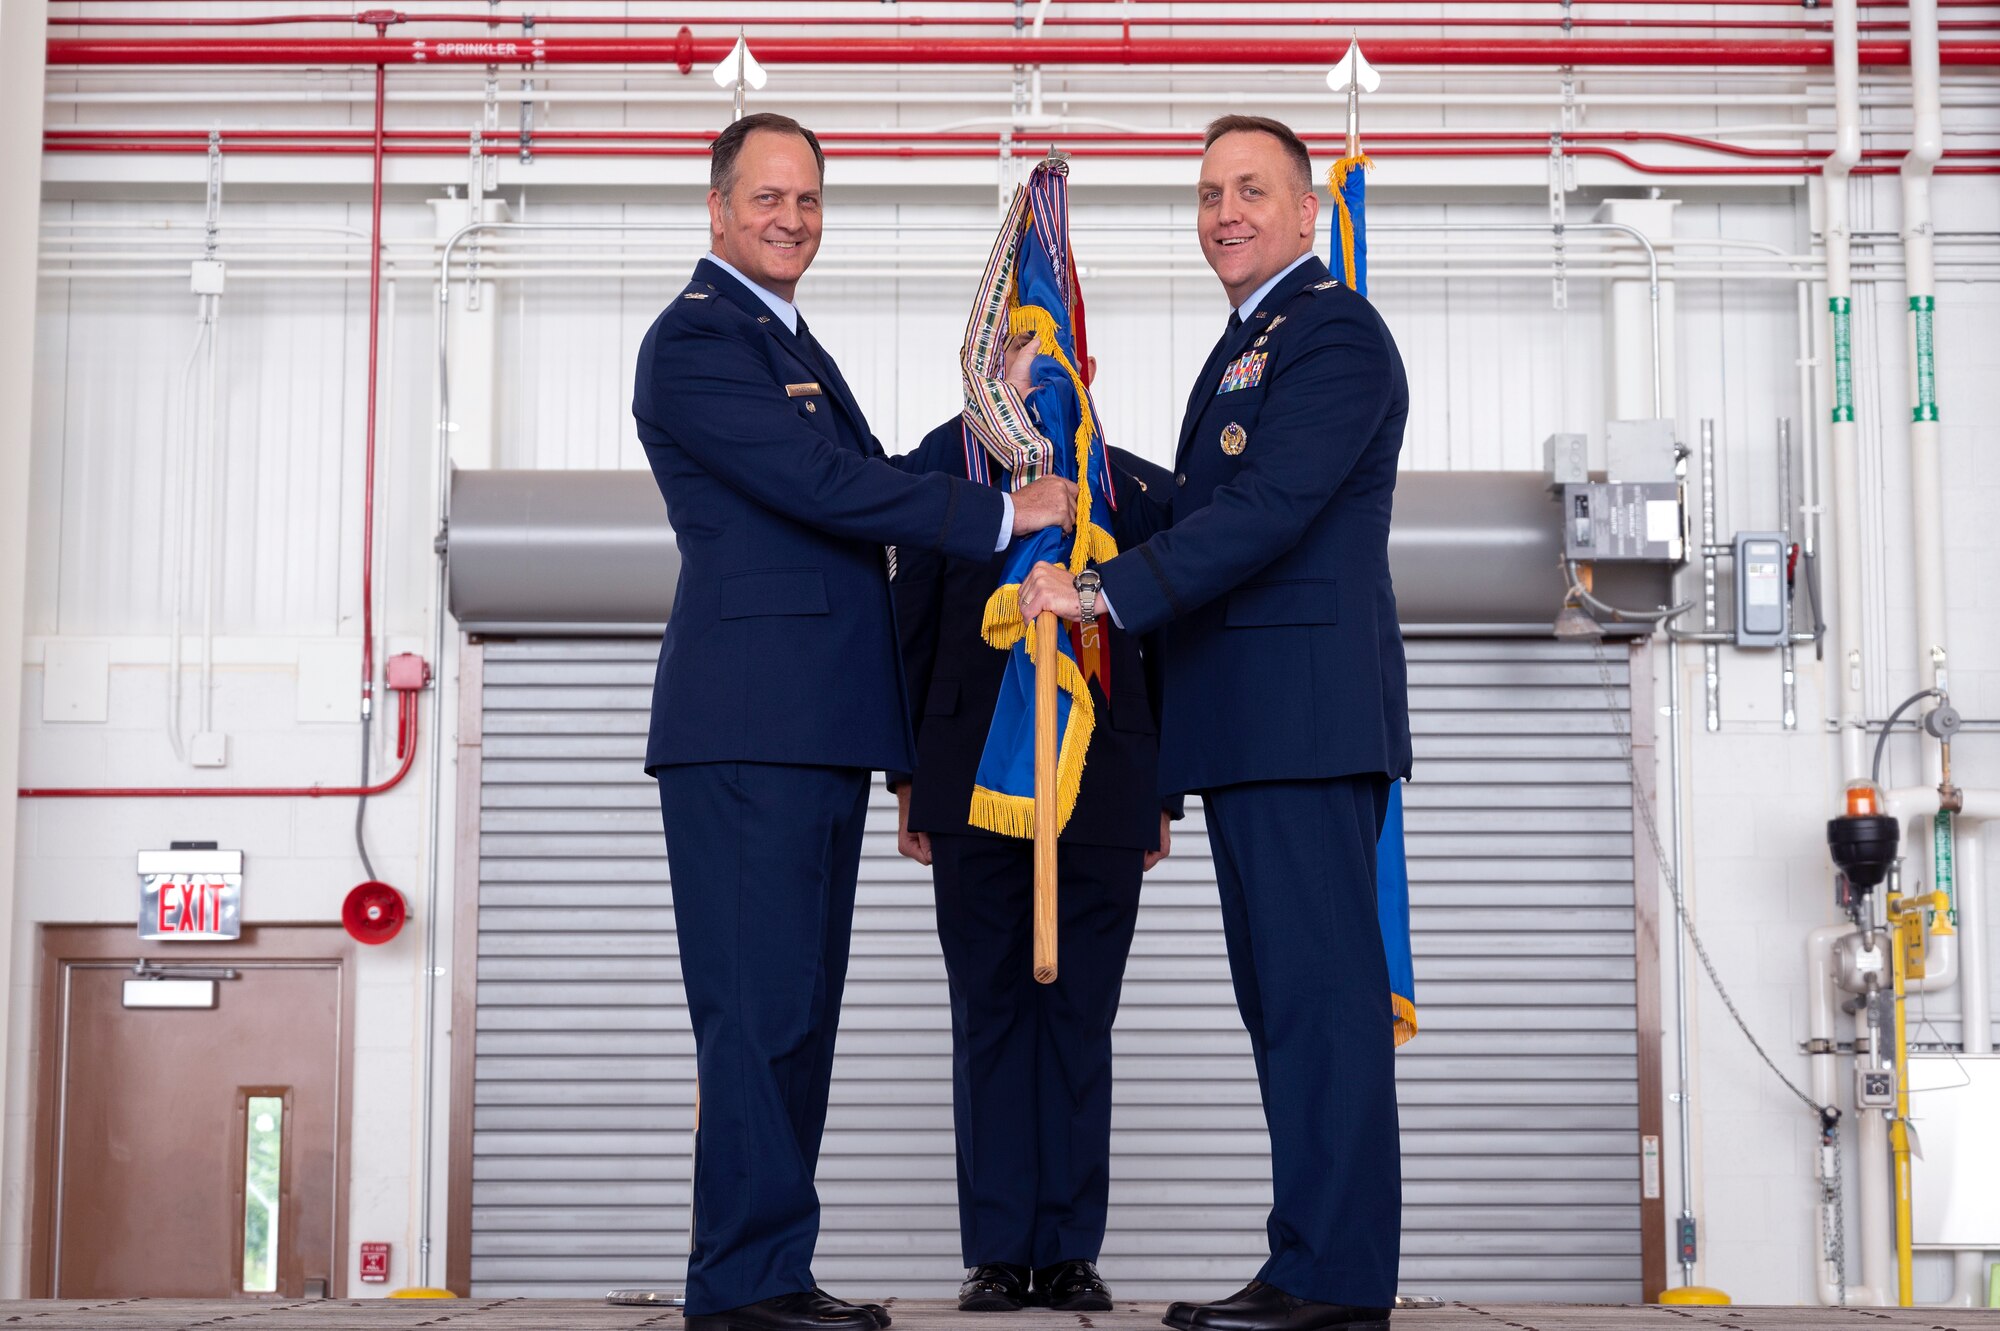 Col. Michael M. Moeding, 4th Air Force vice commander, passes the 911th Airlift Wing guidon to the incoming commander, Col. Bryan M. Bailey, during an assumption of command ceremony at the Pittsburgh International Airport Air Reserve Station, Pennsylvania, Aug. 7, 2022.